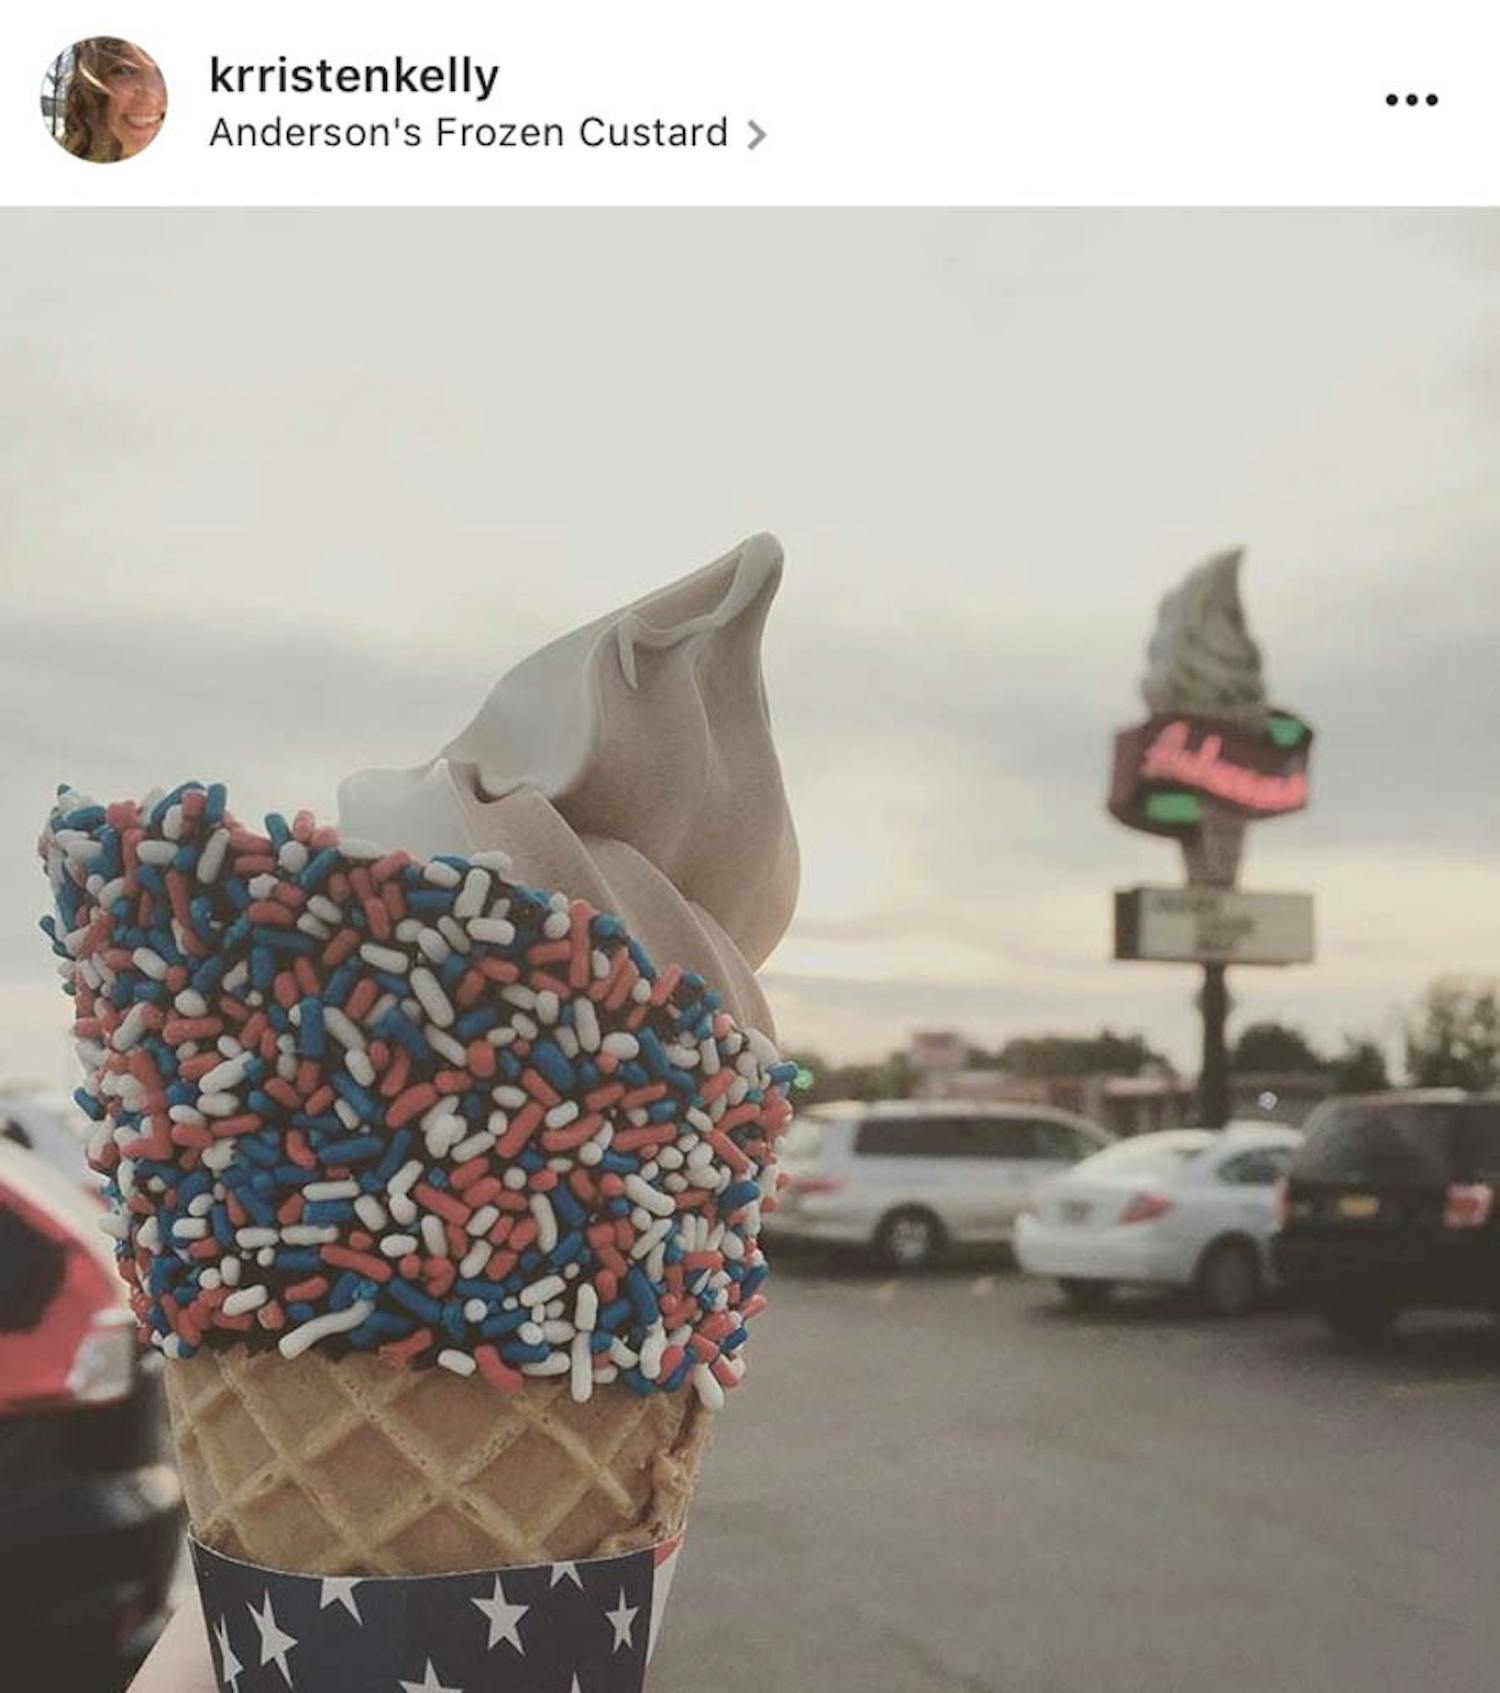 Lemaster holds her dipped waffle cone in front of the old-fashioned Anderson’s sign.